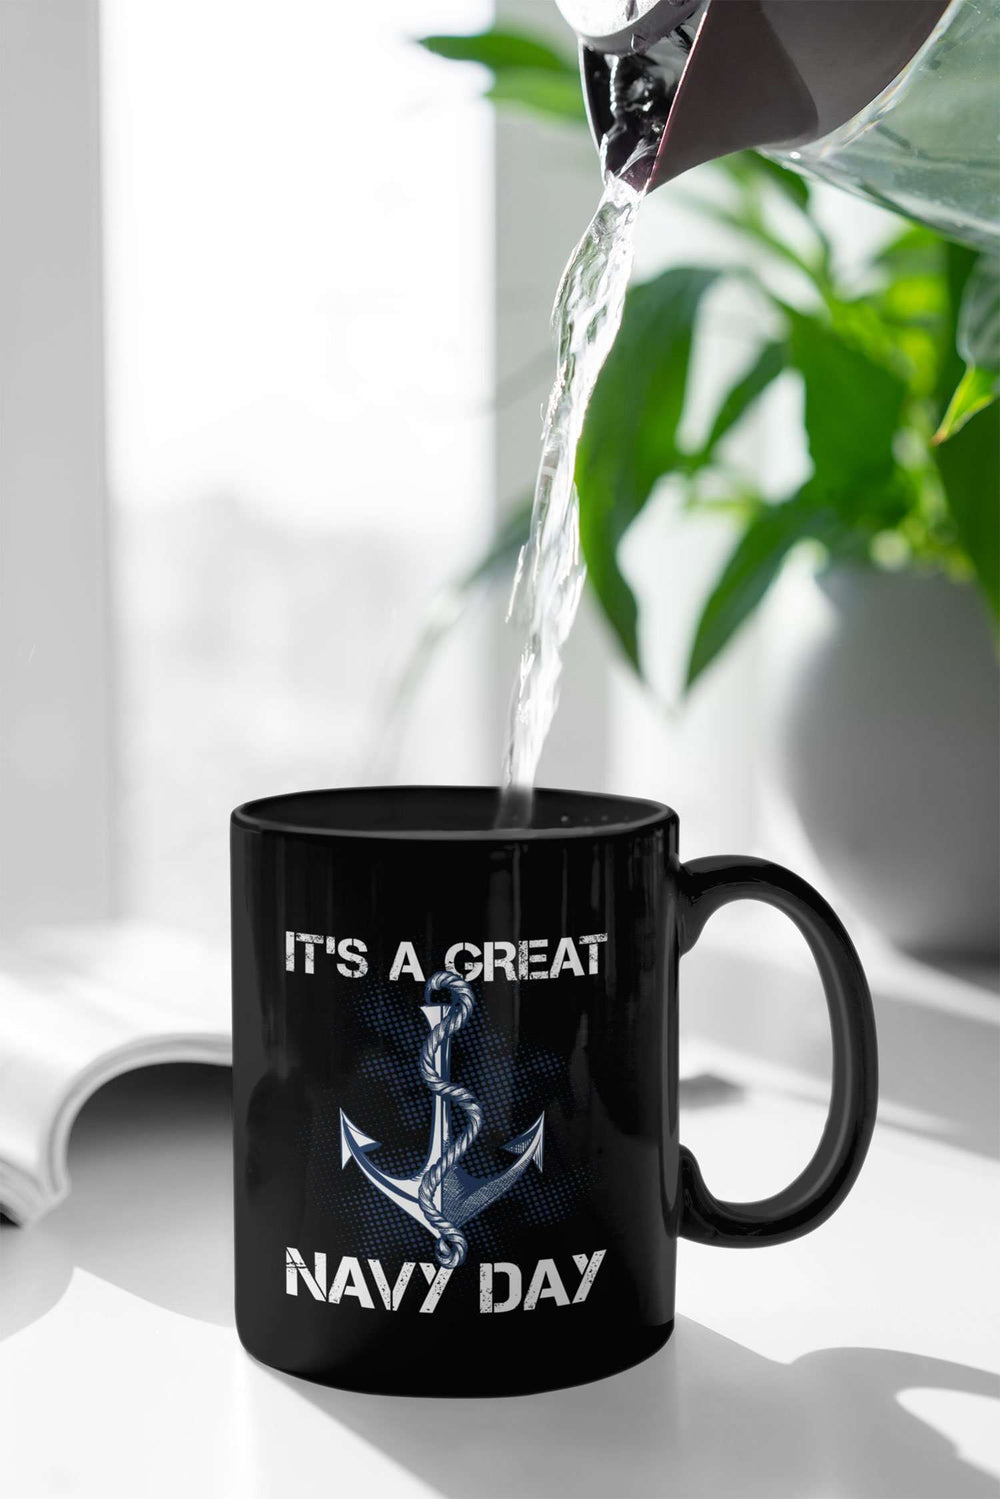 Designs by MyUtopia Shout Out:It's A Great Navy Day Ceramic Coffee Mug